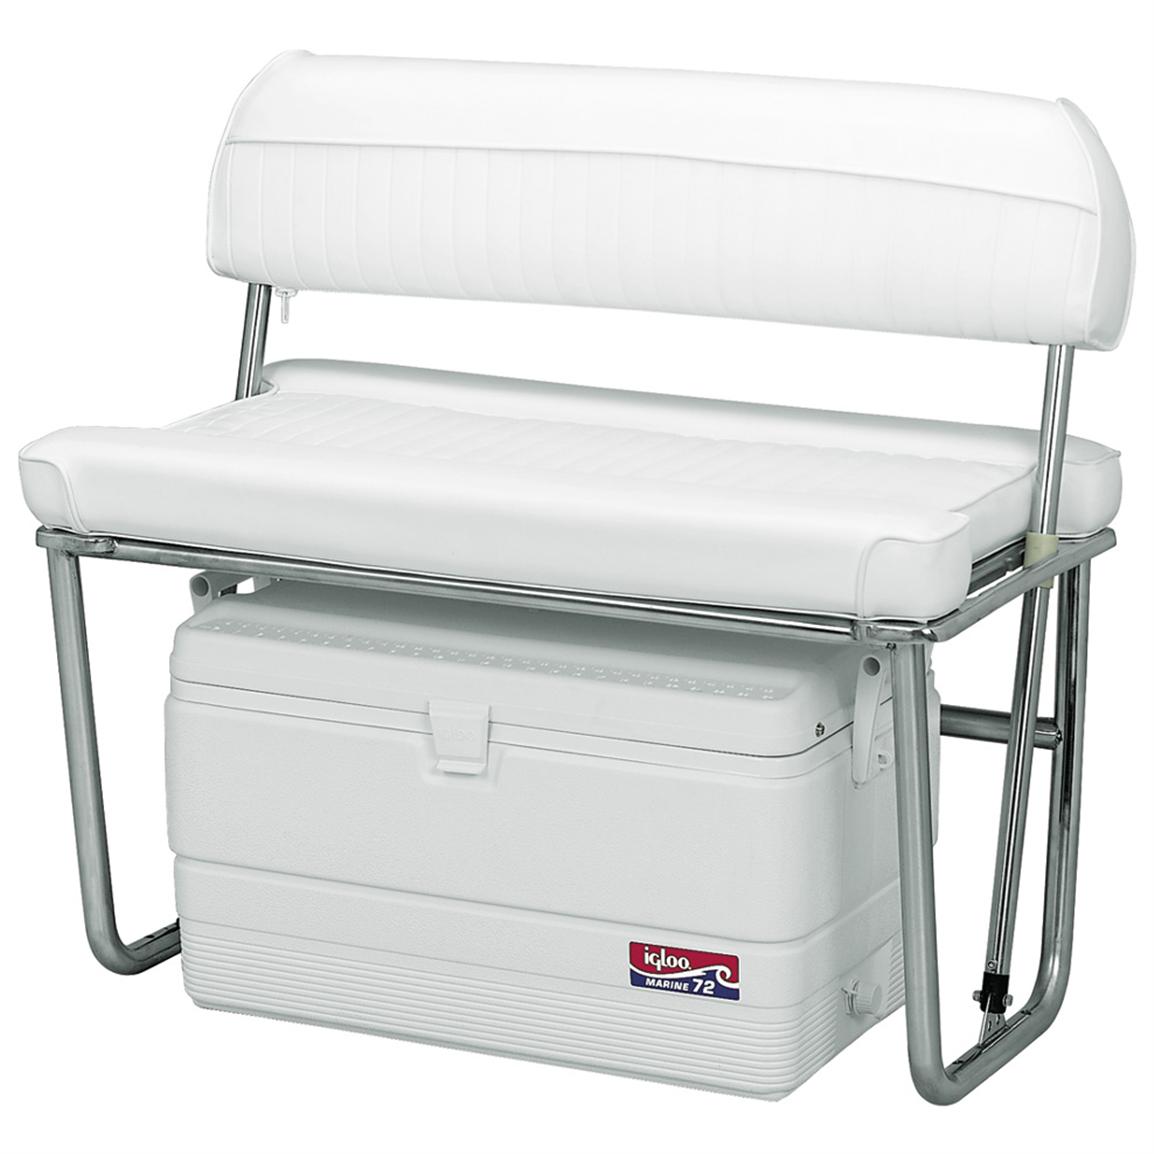 boat bench seat with cooler